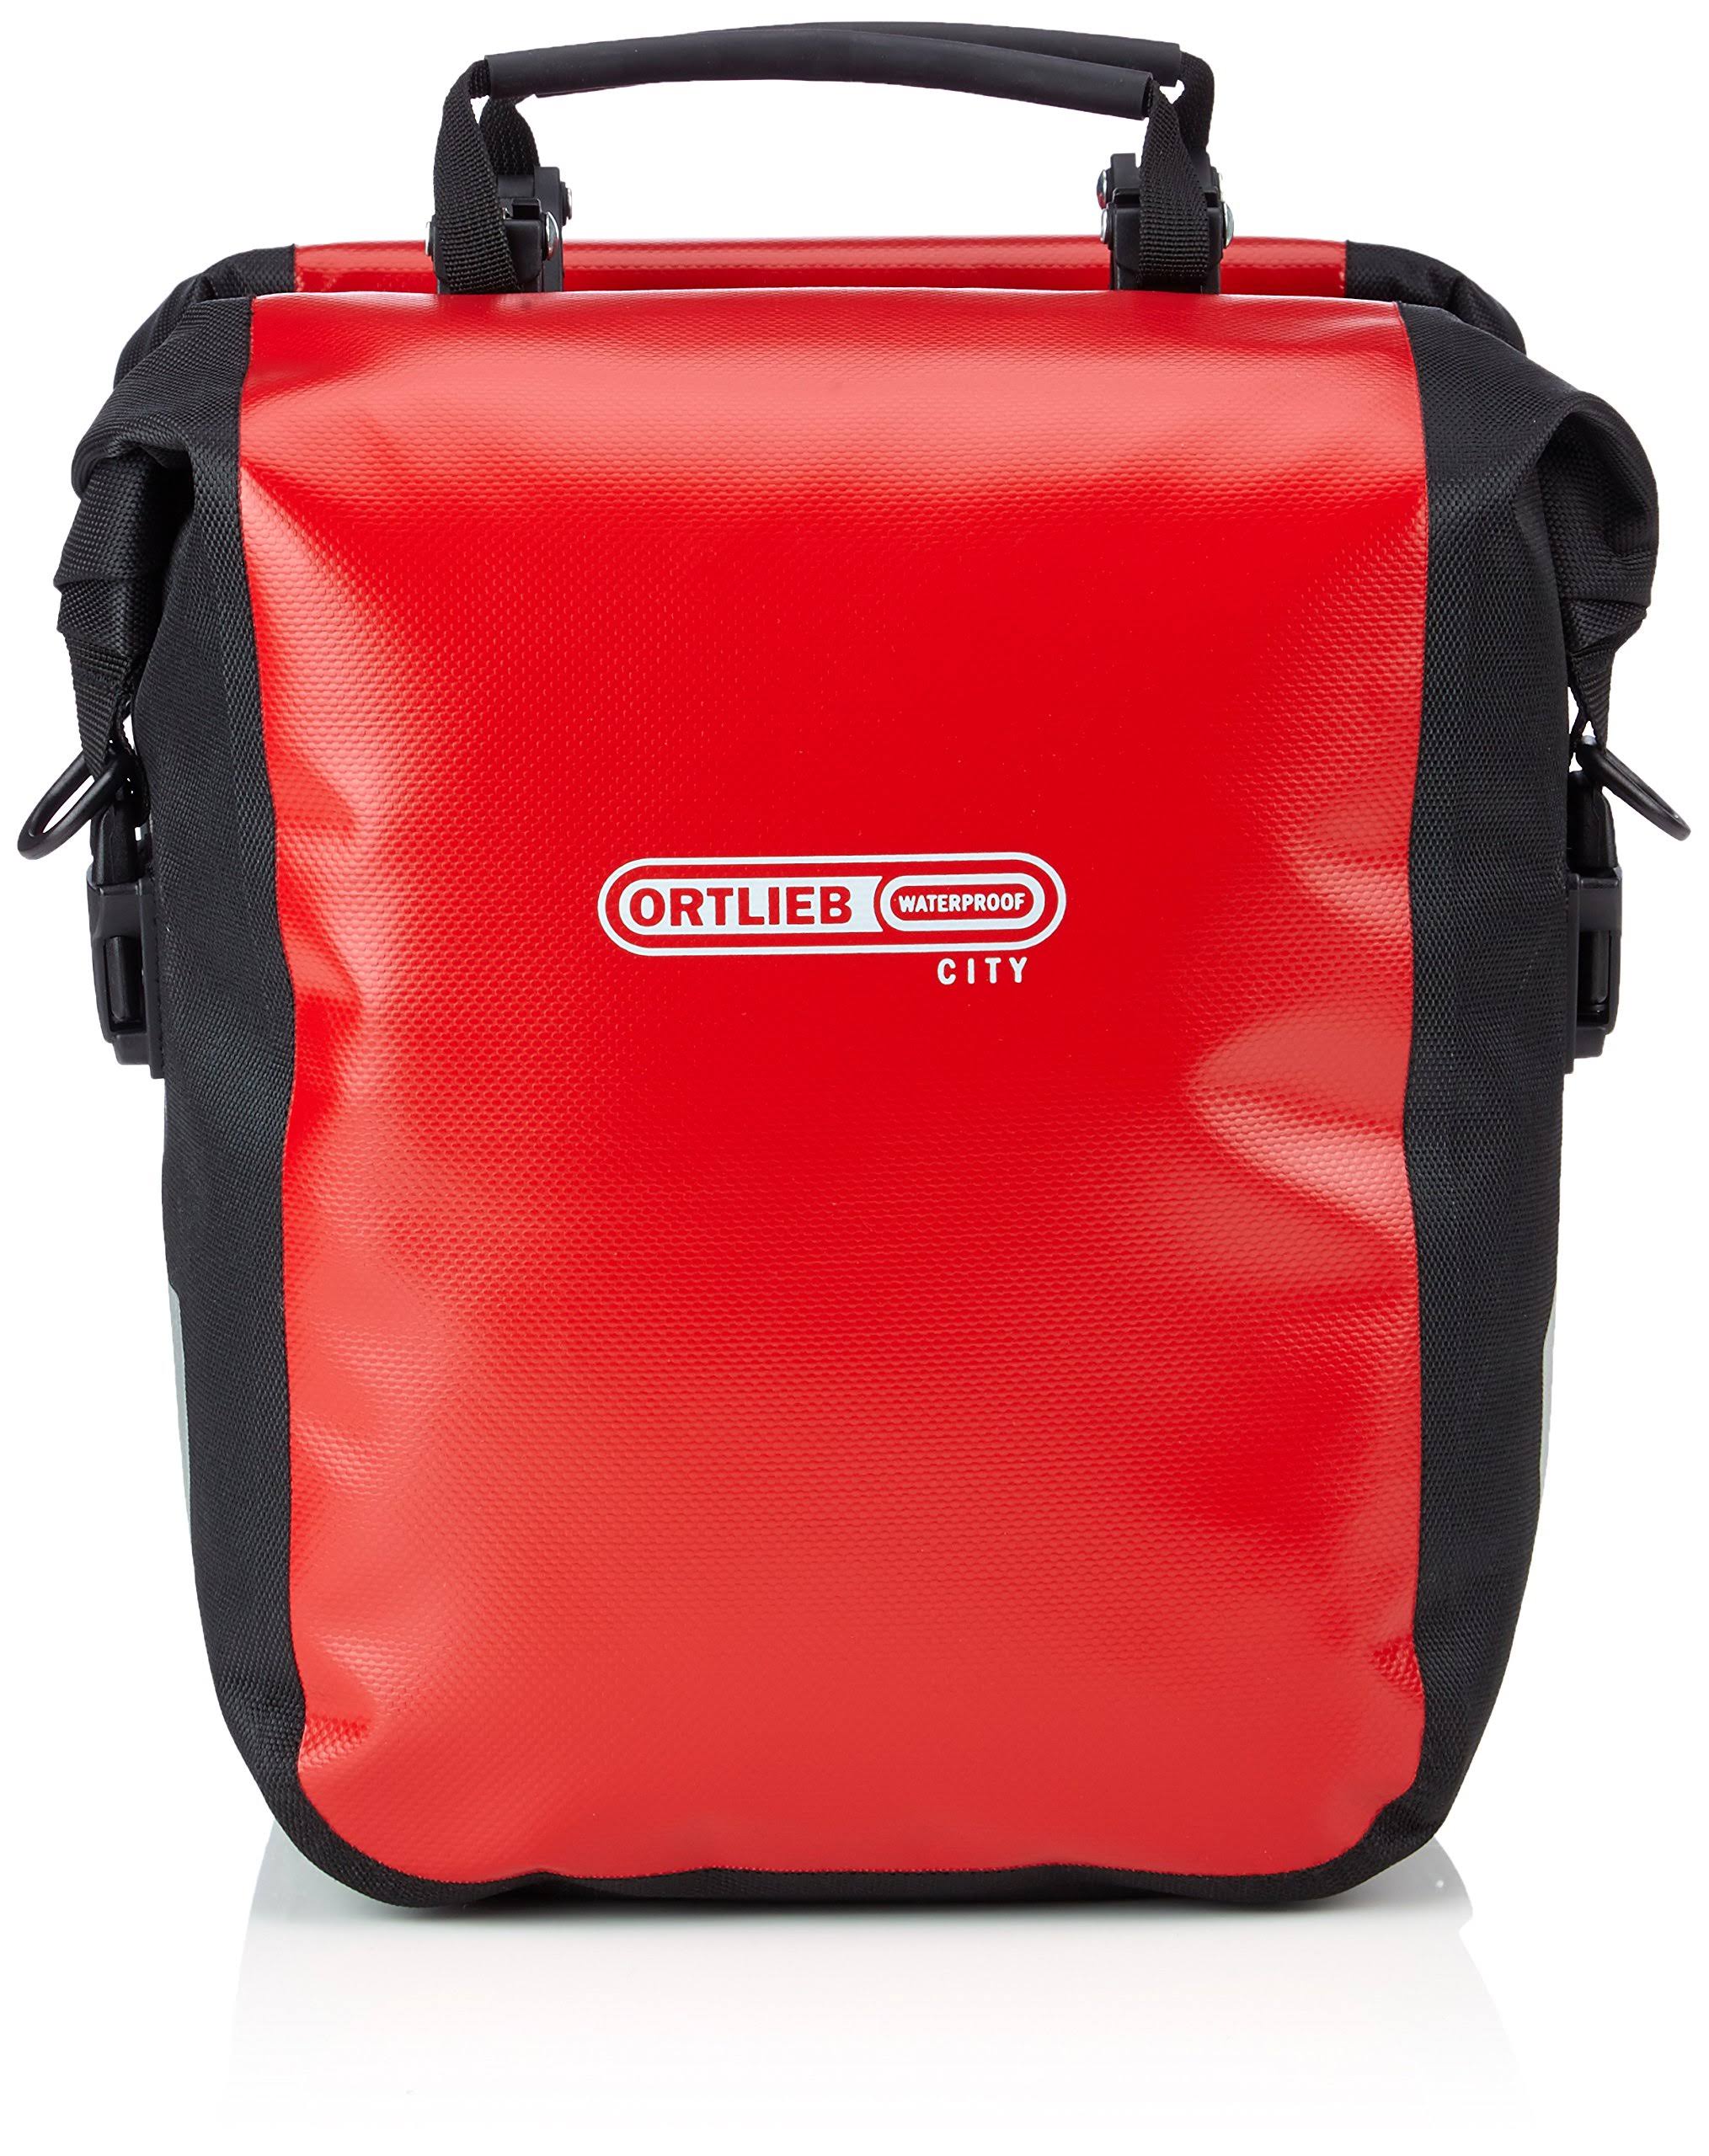 Ortlieb Front-Roller City Front Pannier - Red & Black